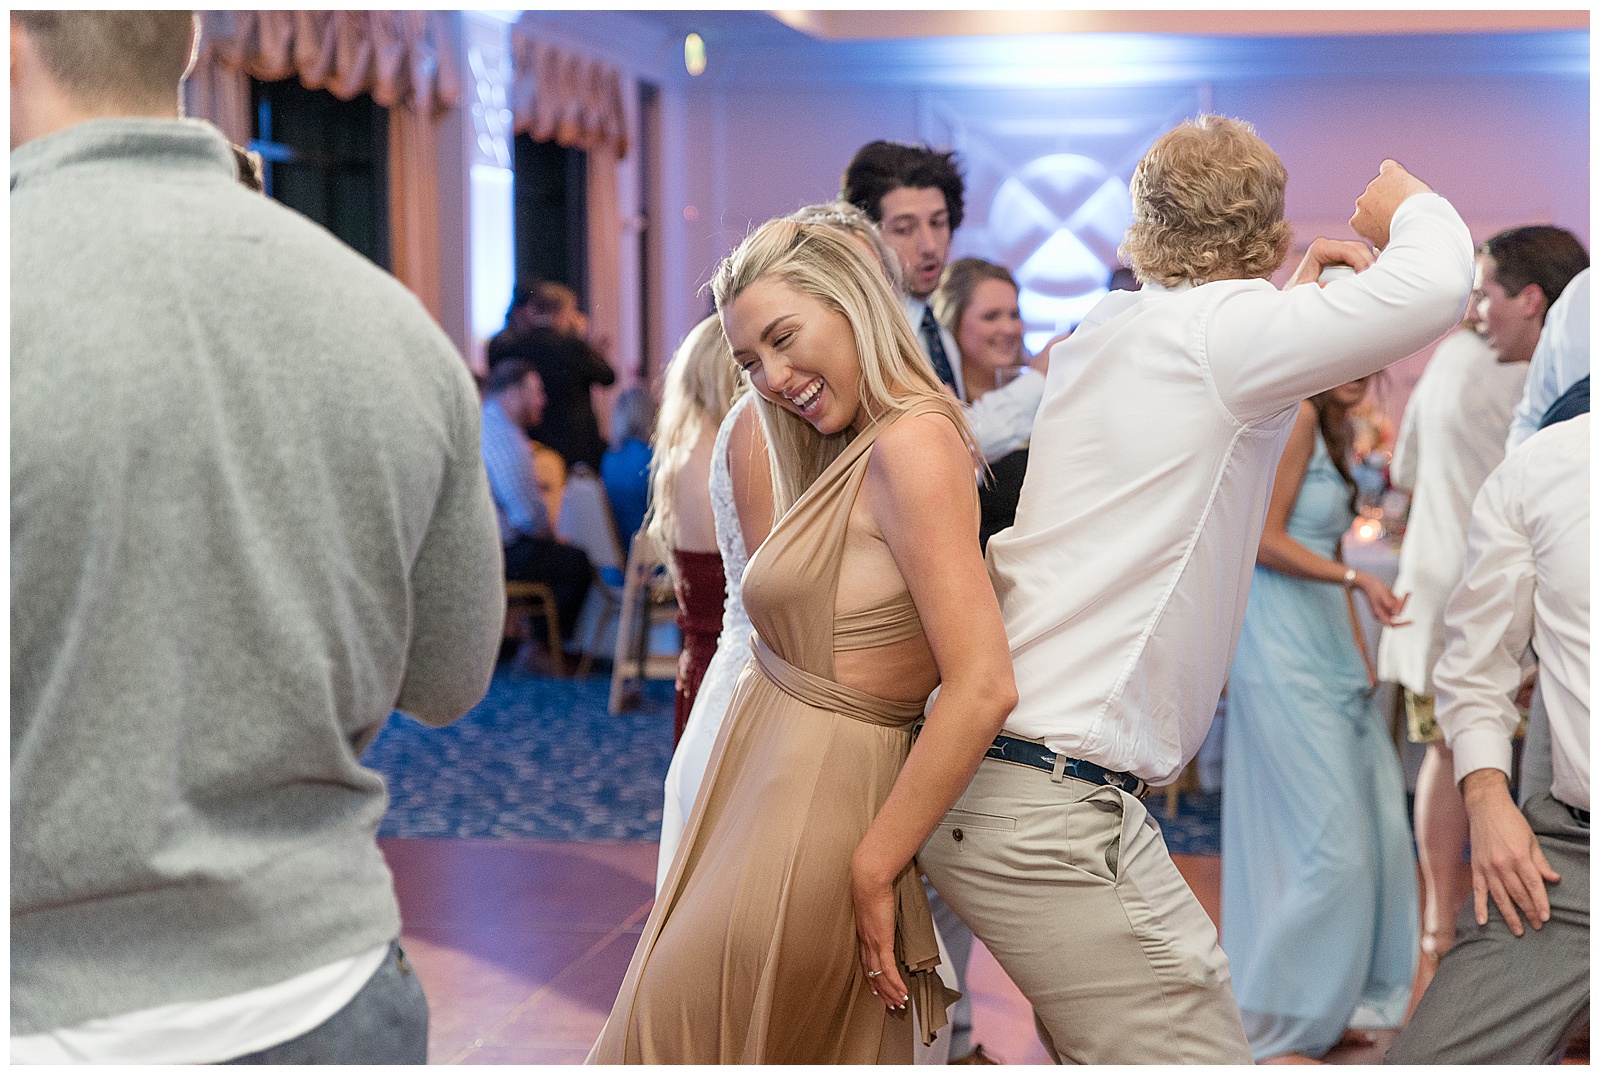 guests dancing with their backs toward one another during indoor wedding reception with colorful lighting in background